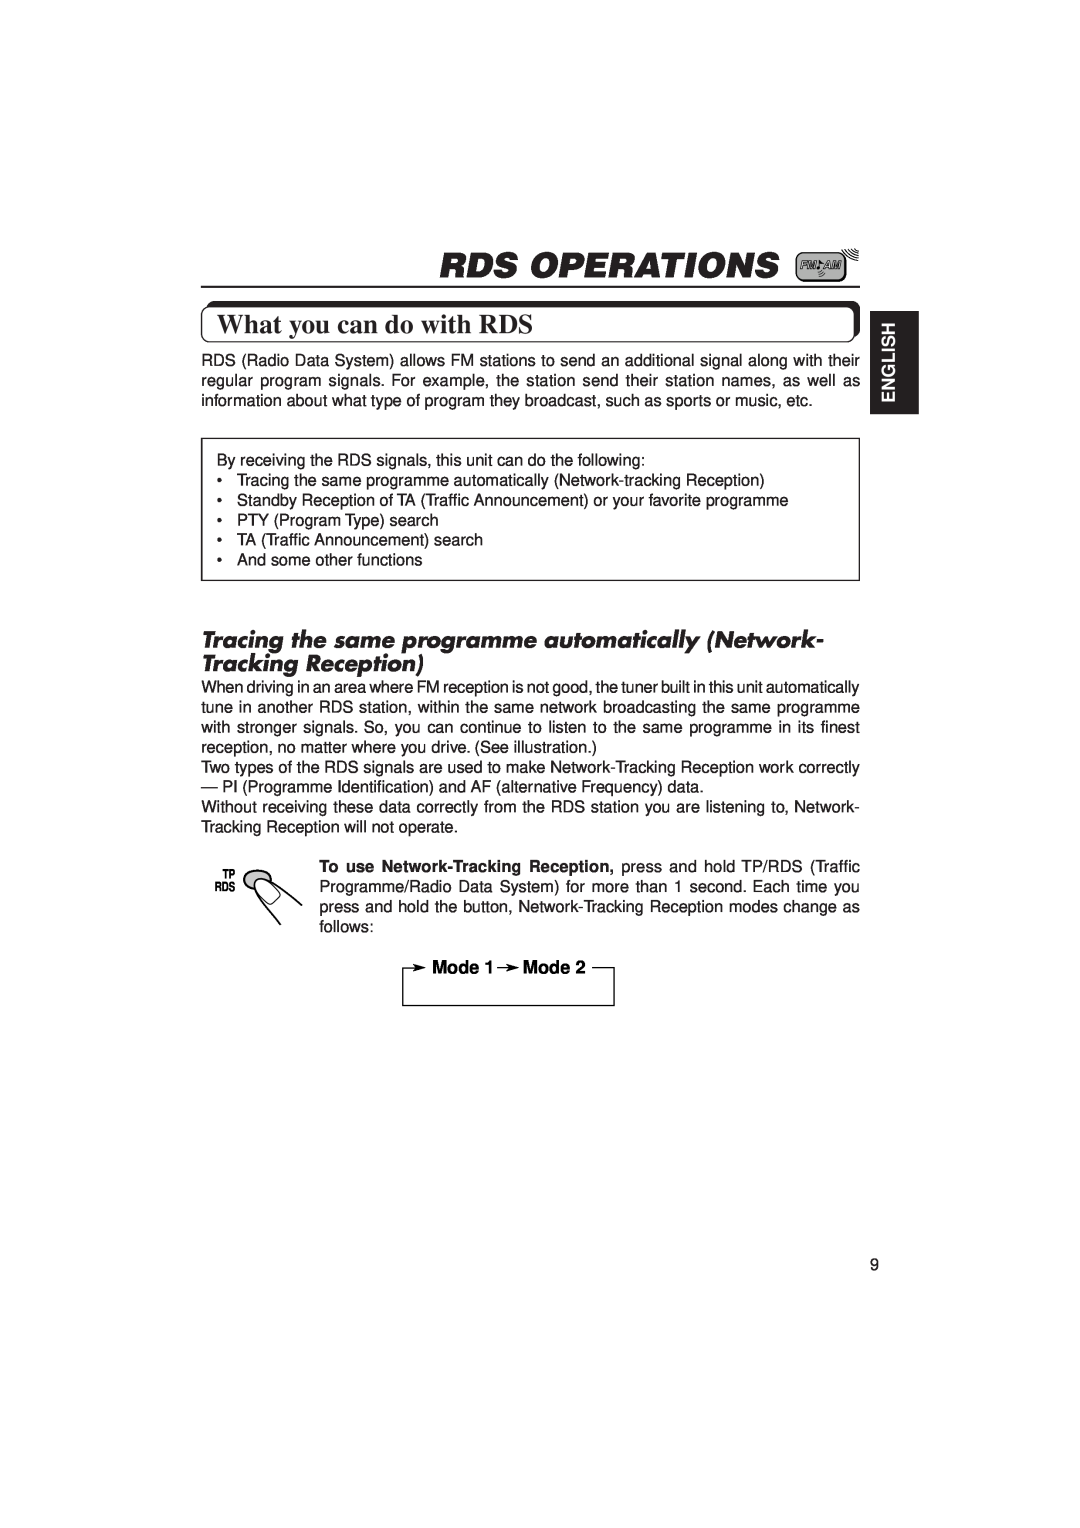 JVC KD-SX1000RJ manual Rds Operations, What you can do with RDS, English, Mode 1 Mode 